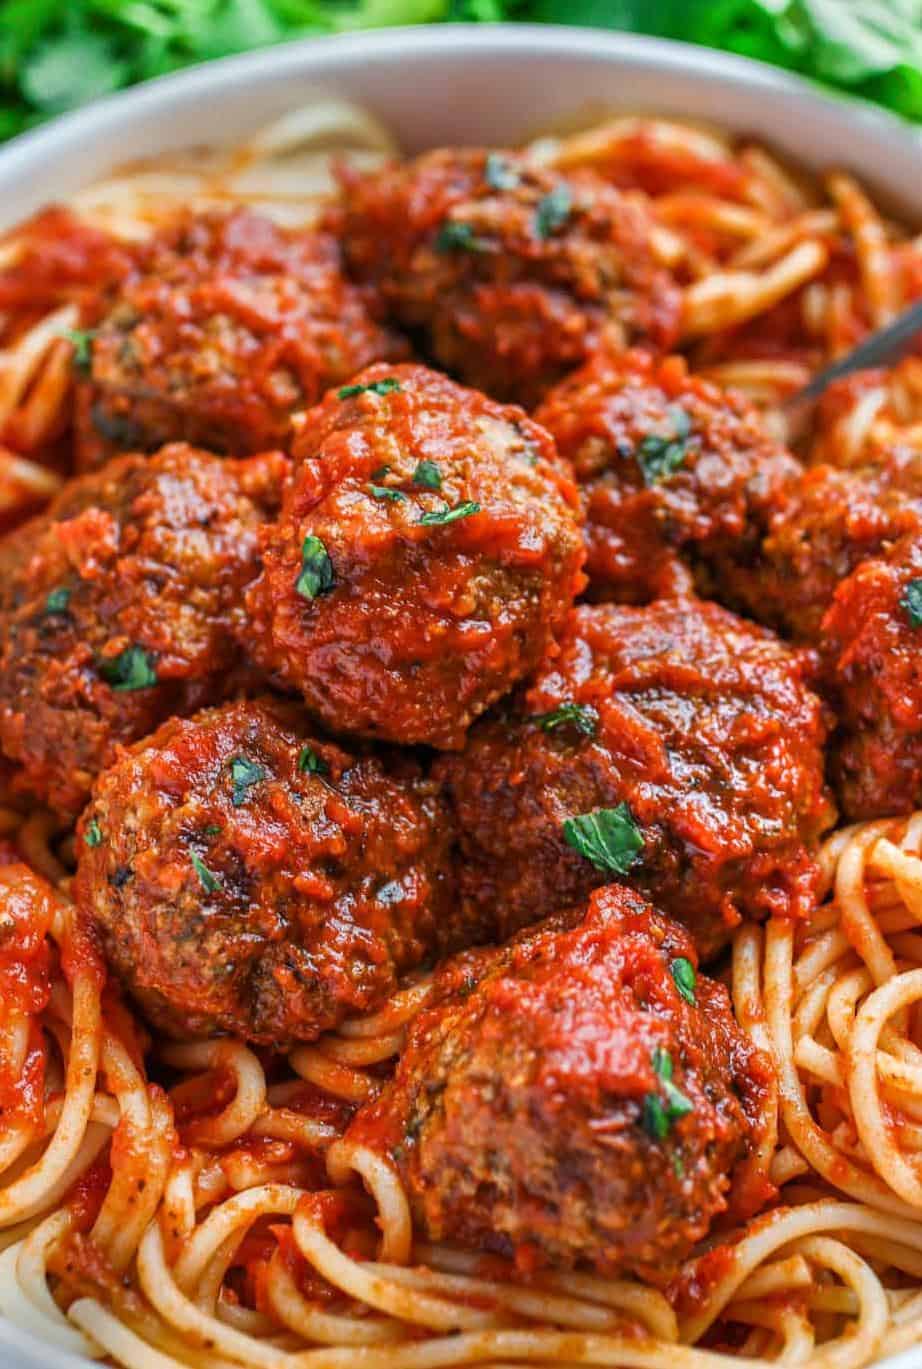  Perfect for a cozy night in, spaghetti and meatballs always hits the spot.